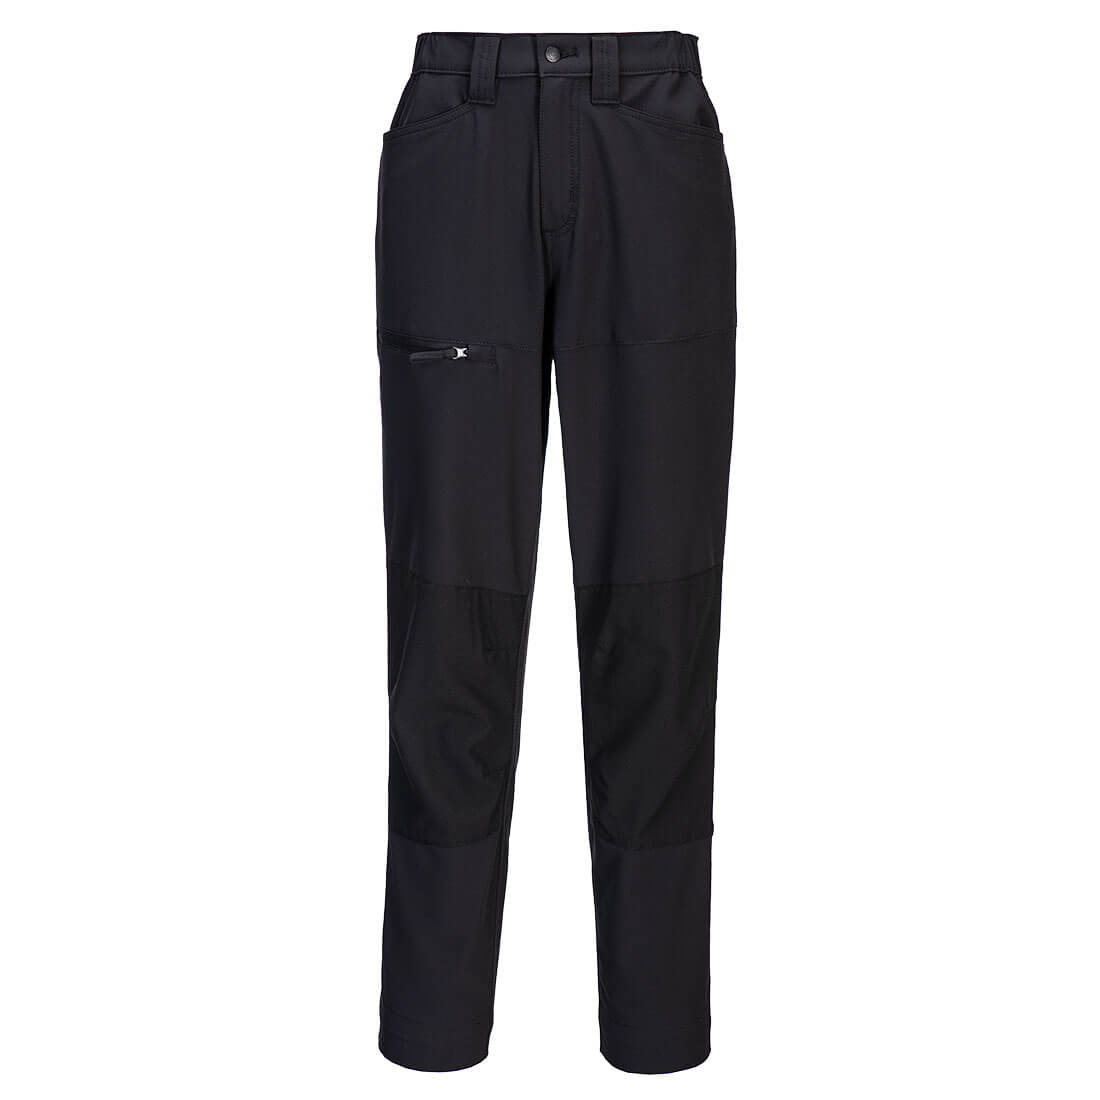 CD887 - WX2 Eco Women's Stretch Work Trousers